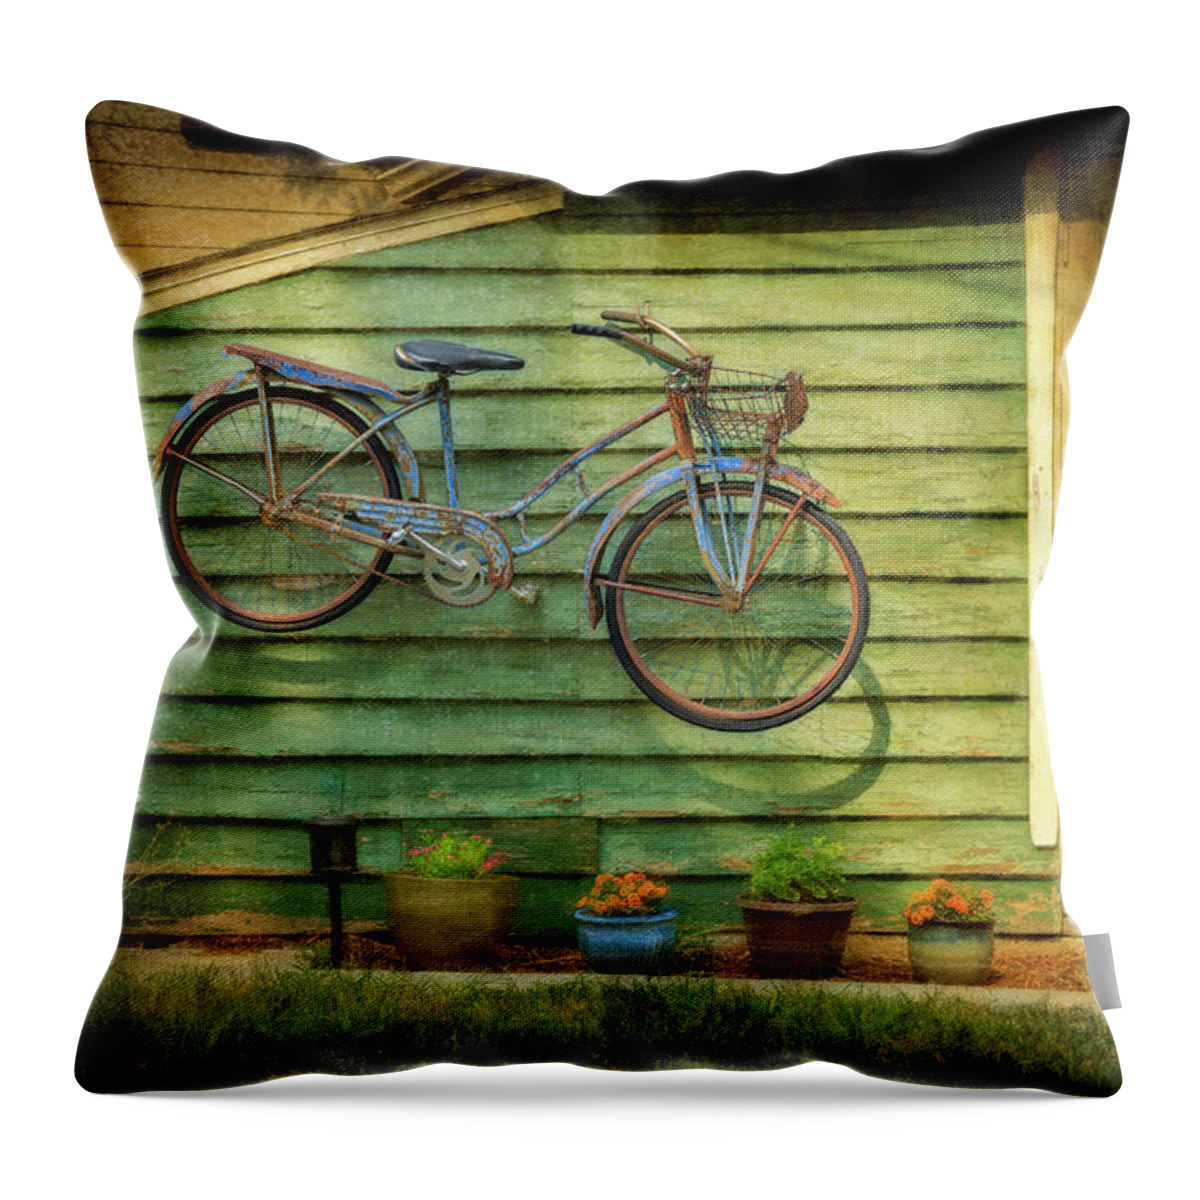 Aib_2022 #2551 Throw Pillow featuring the photograph Blue Bicycle on the Wall by Craig J Satterlee